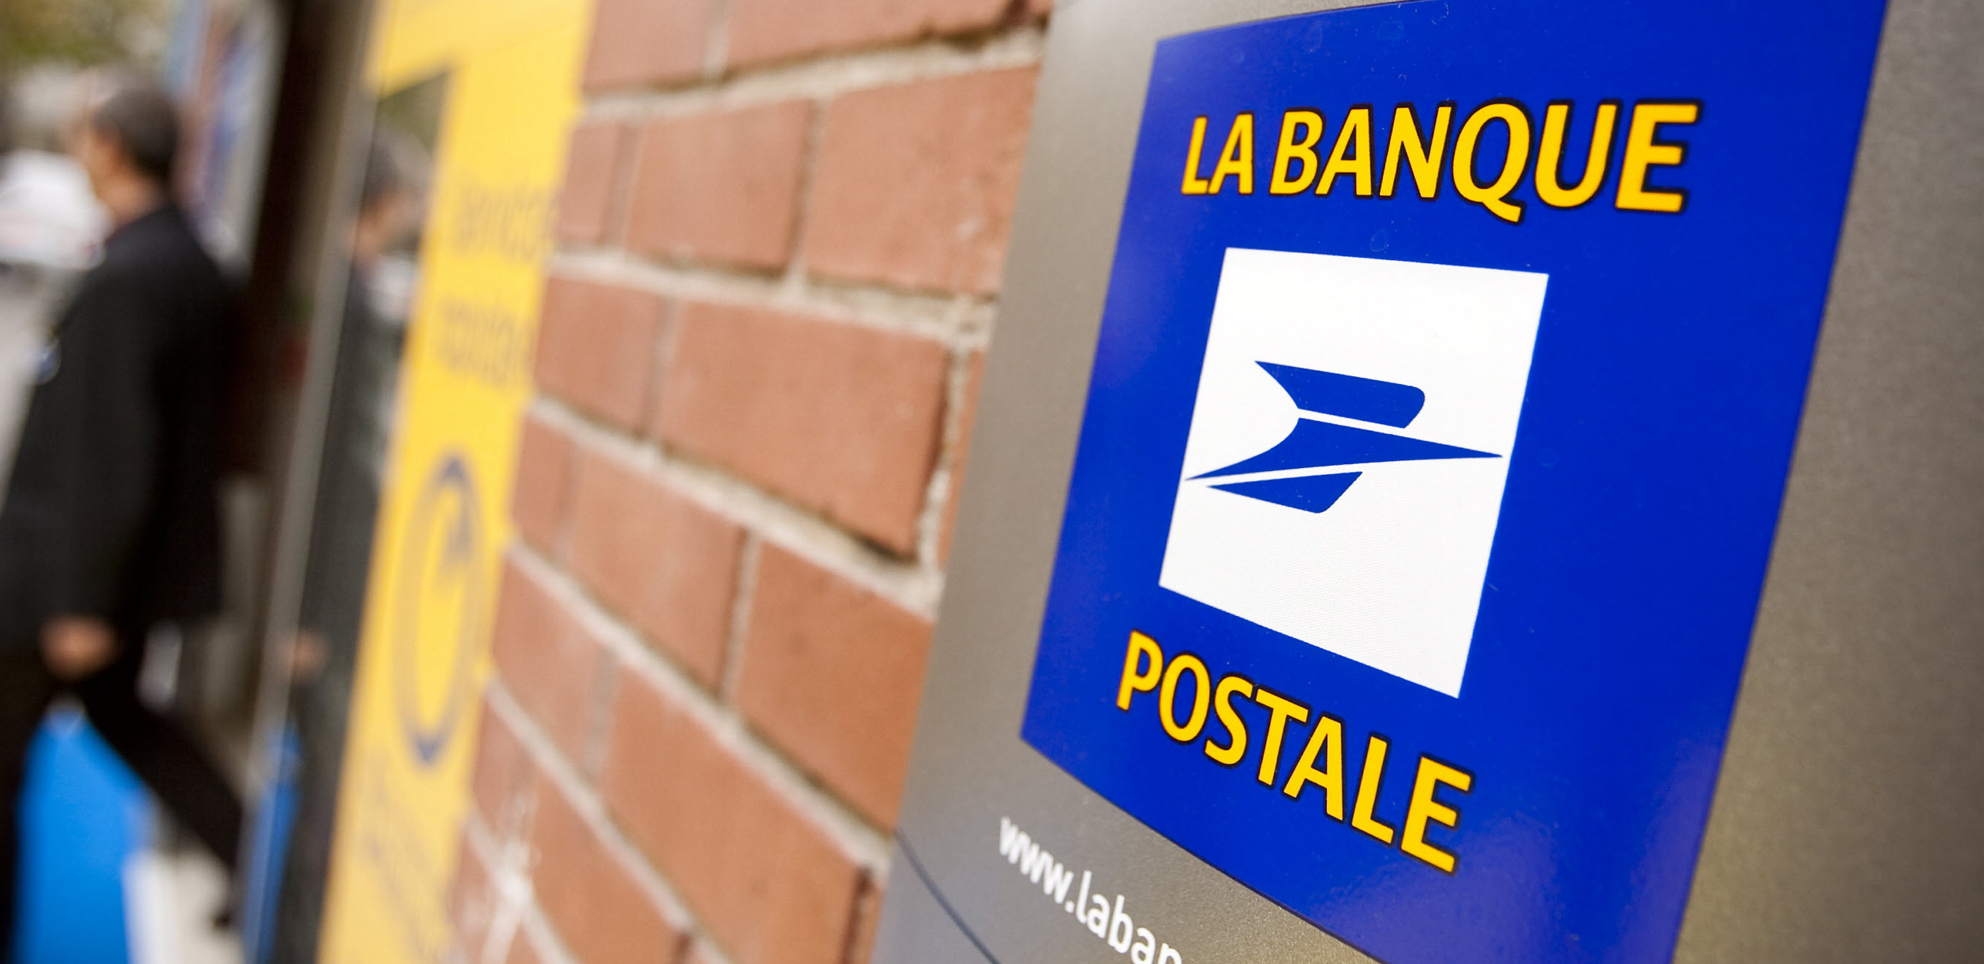 banque postale_crowdfunding